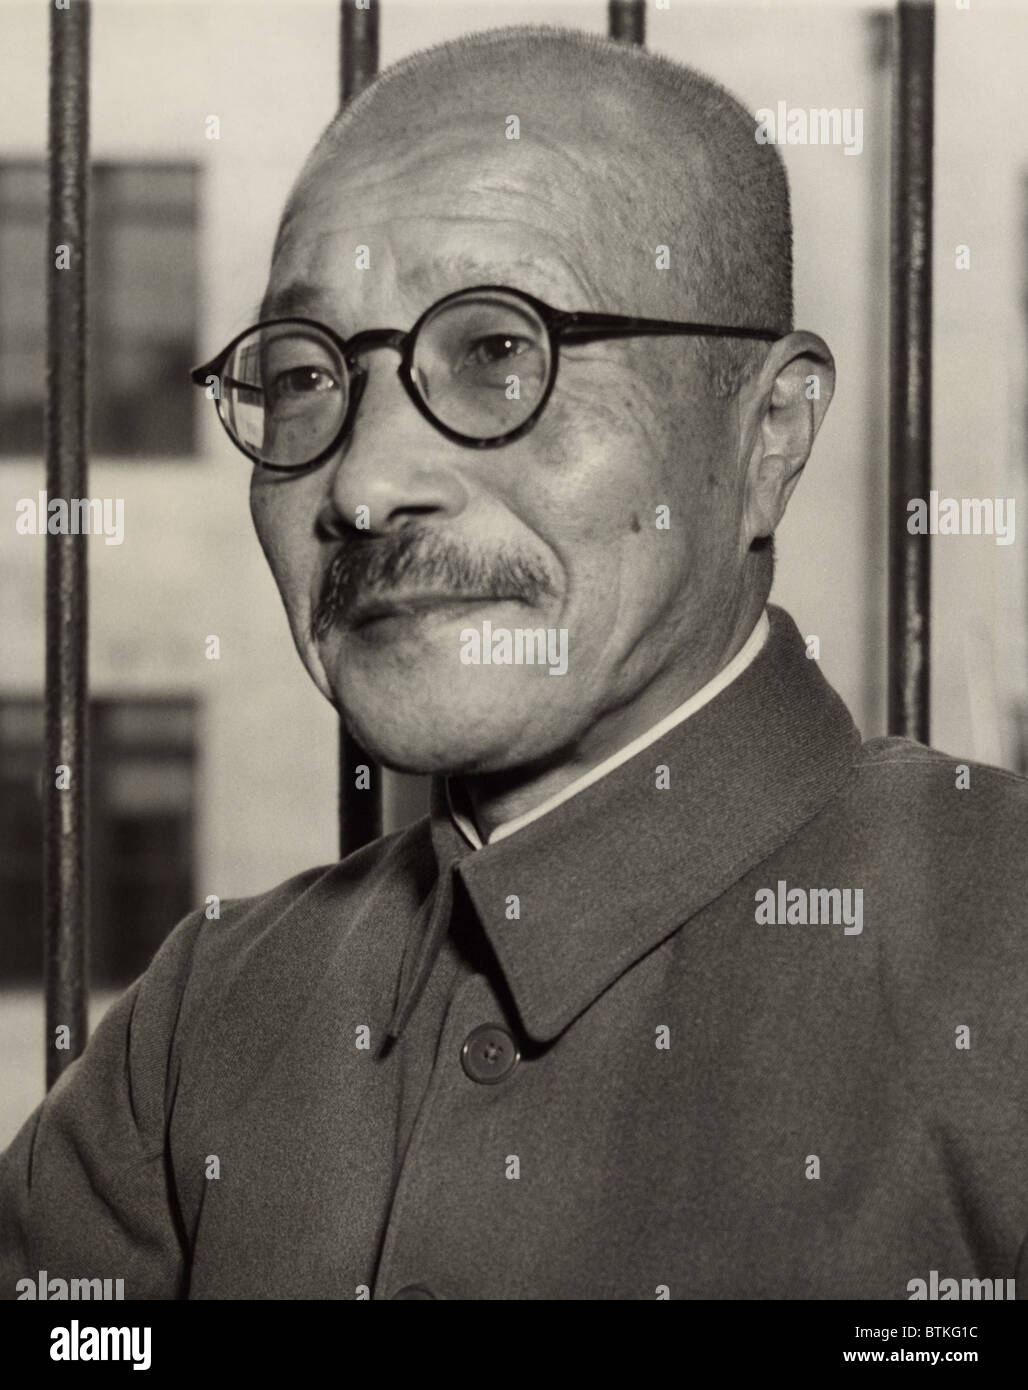 Tojo Hideki (1884-1948), Japanese World War II leader who advocated the Tripartite Pact with Germany and Italy in 1940, and Japanese aggression in Asia. He was executed as a war criminal in 1948. Stock Photo